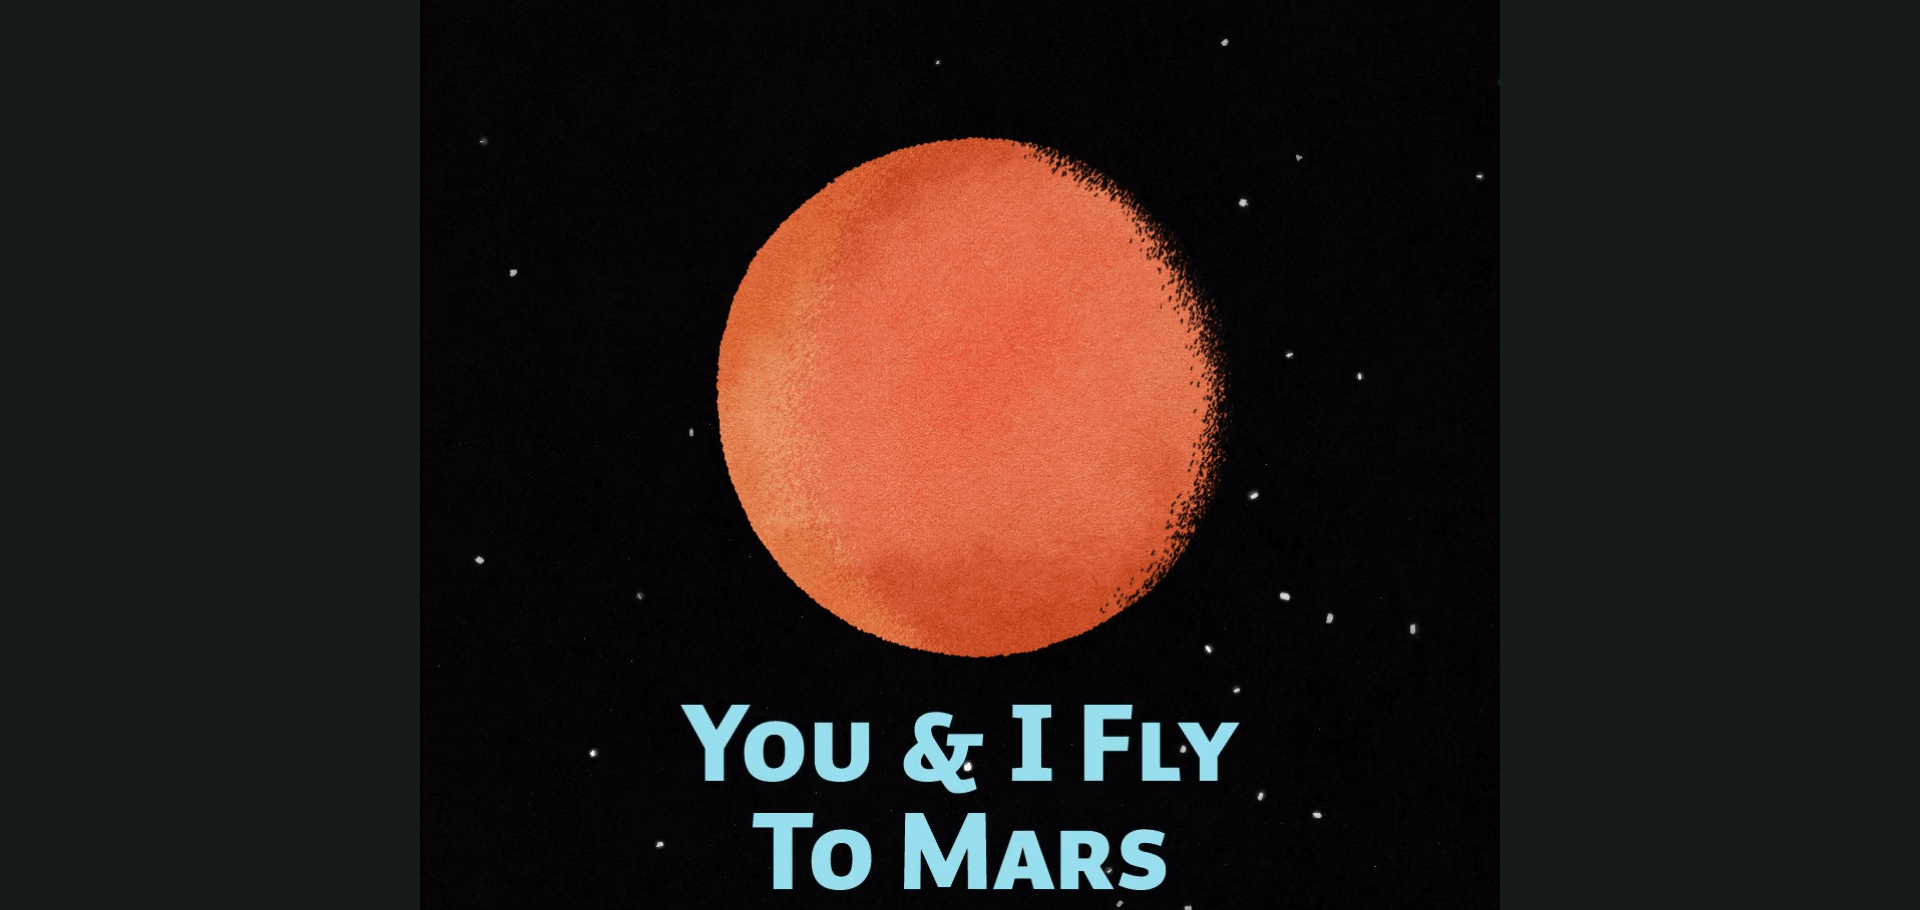 YOU & I FLY TO MARS